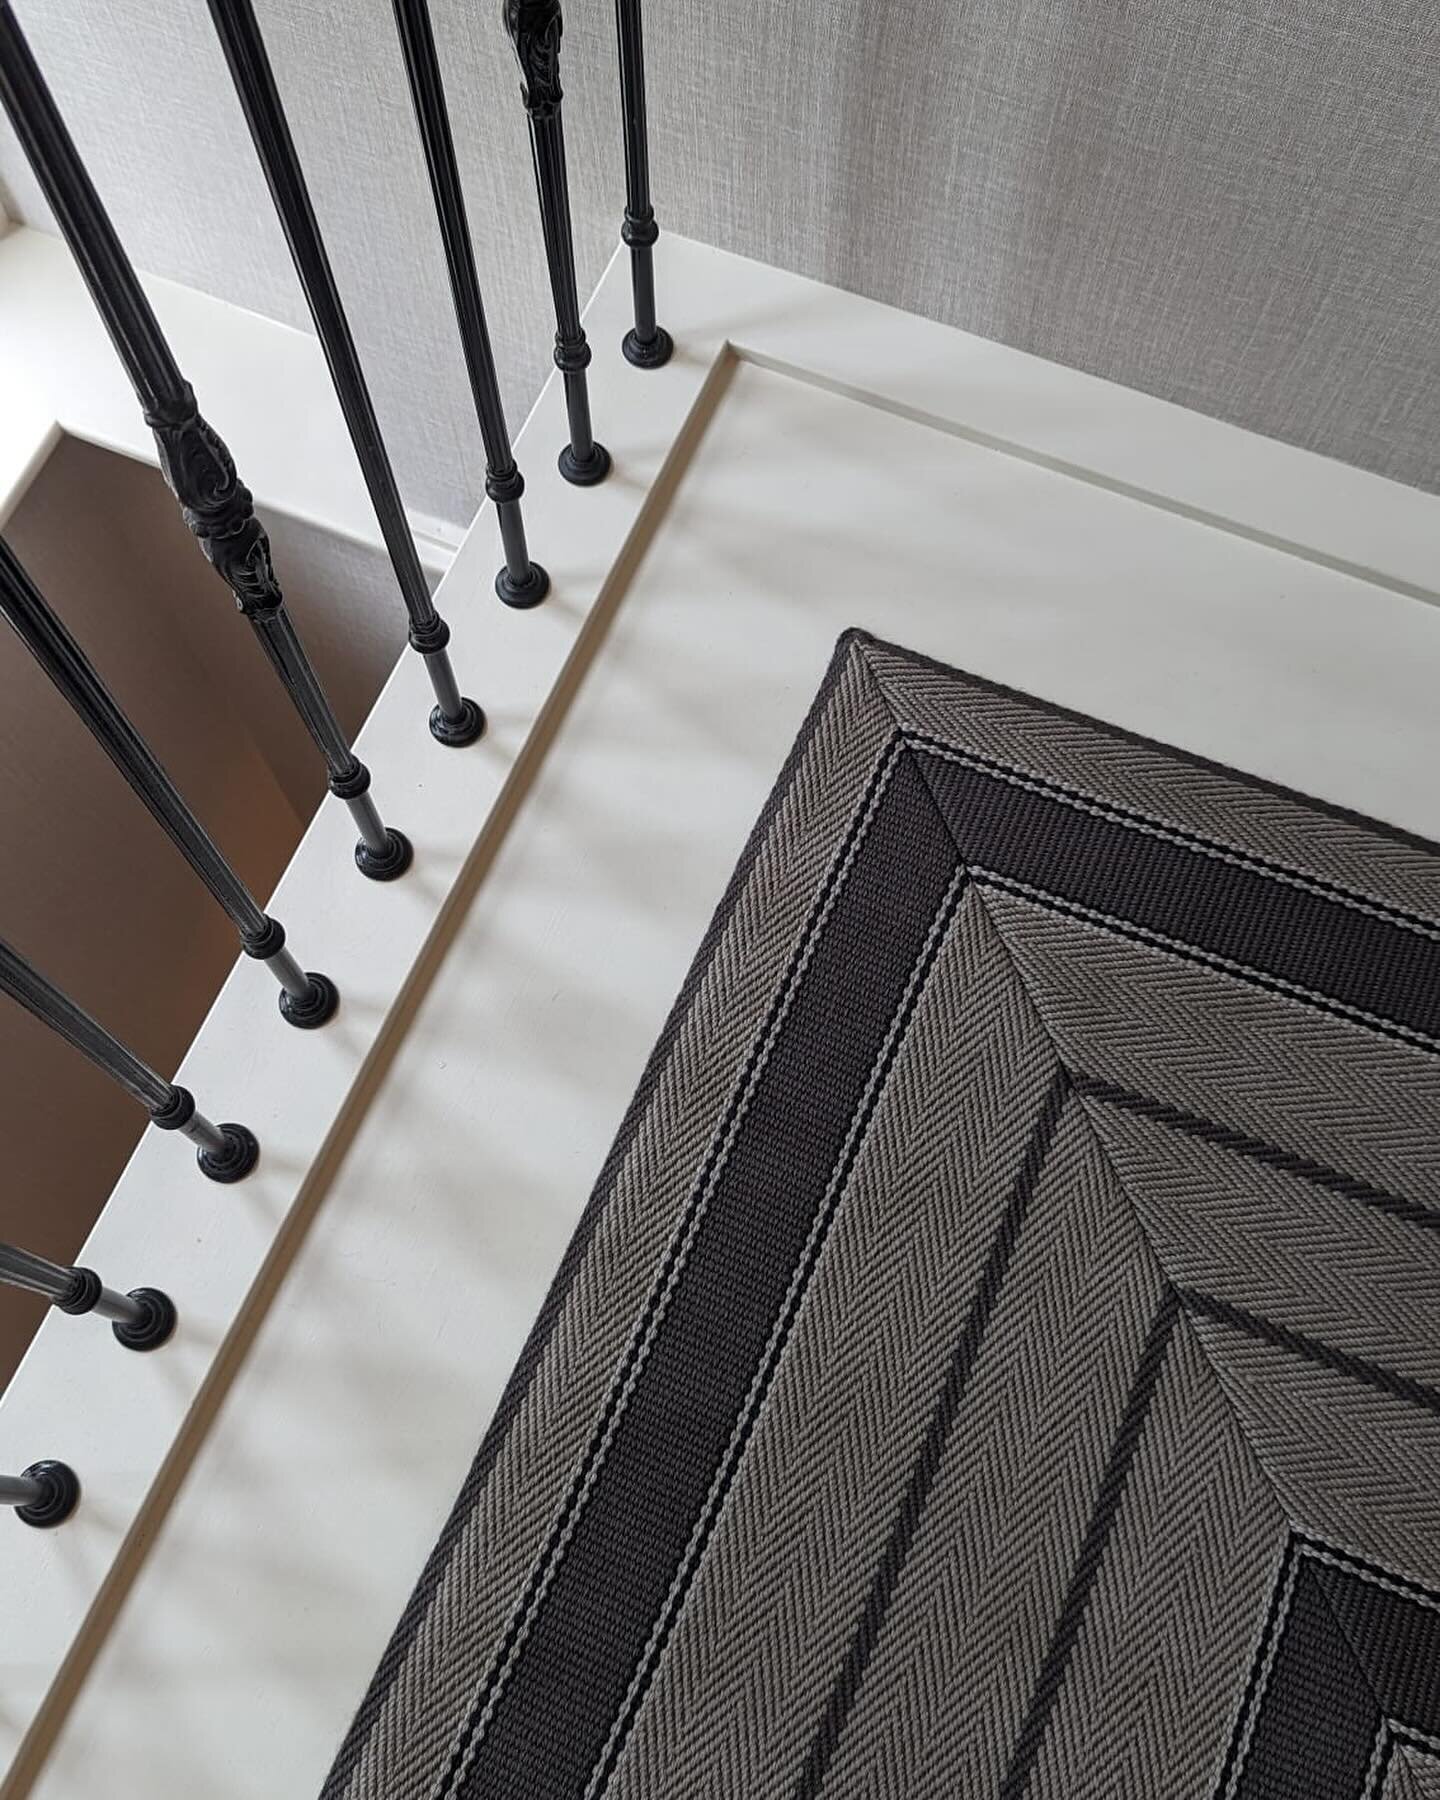 Precision is key in our projects and it&rsquo;s these small details which help elevate a finished space.
This combination at a recent refurbishment of; skilful decorating, new wrought iron balustrading, and an expertly executed installation, such as 